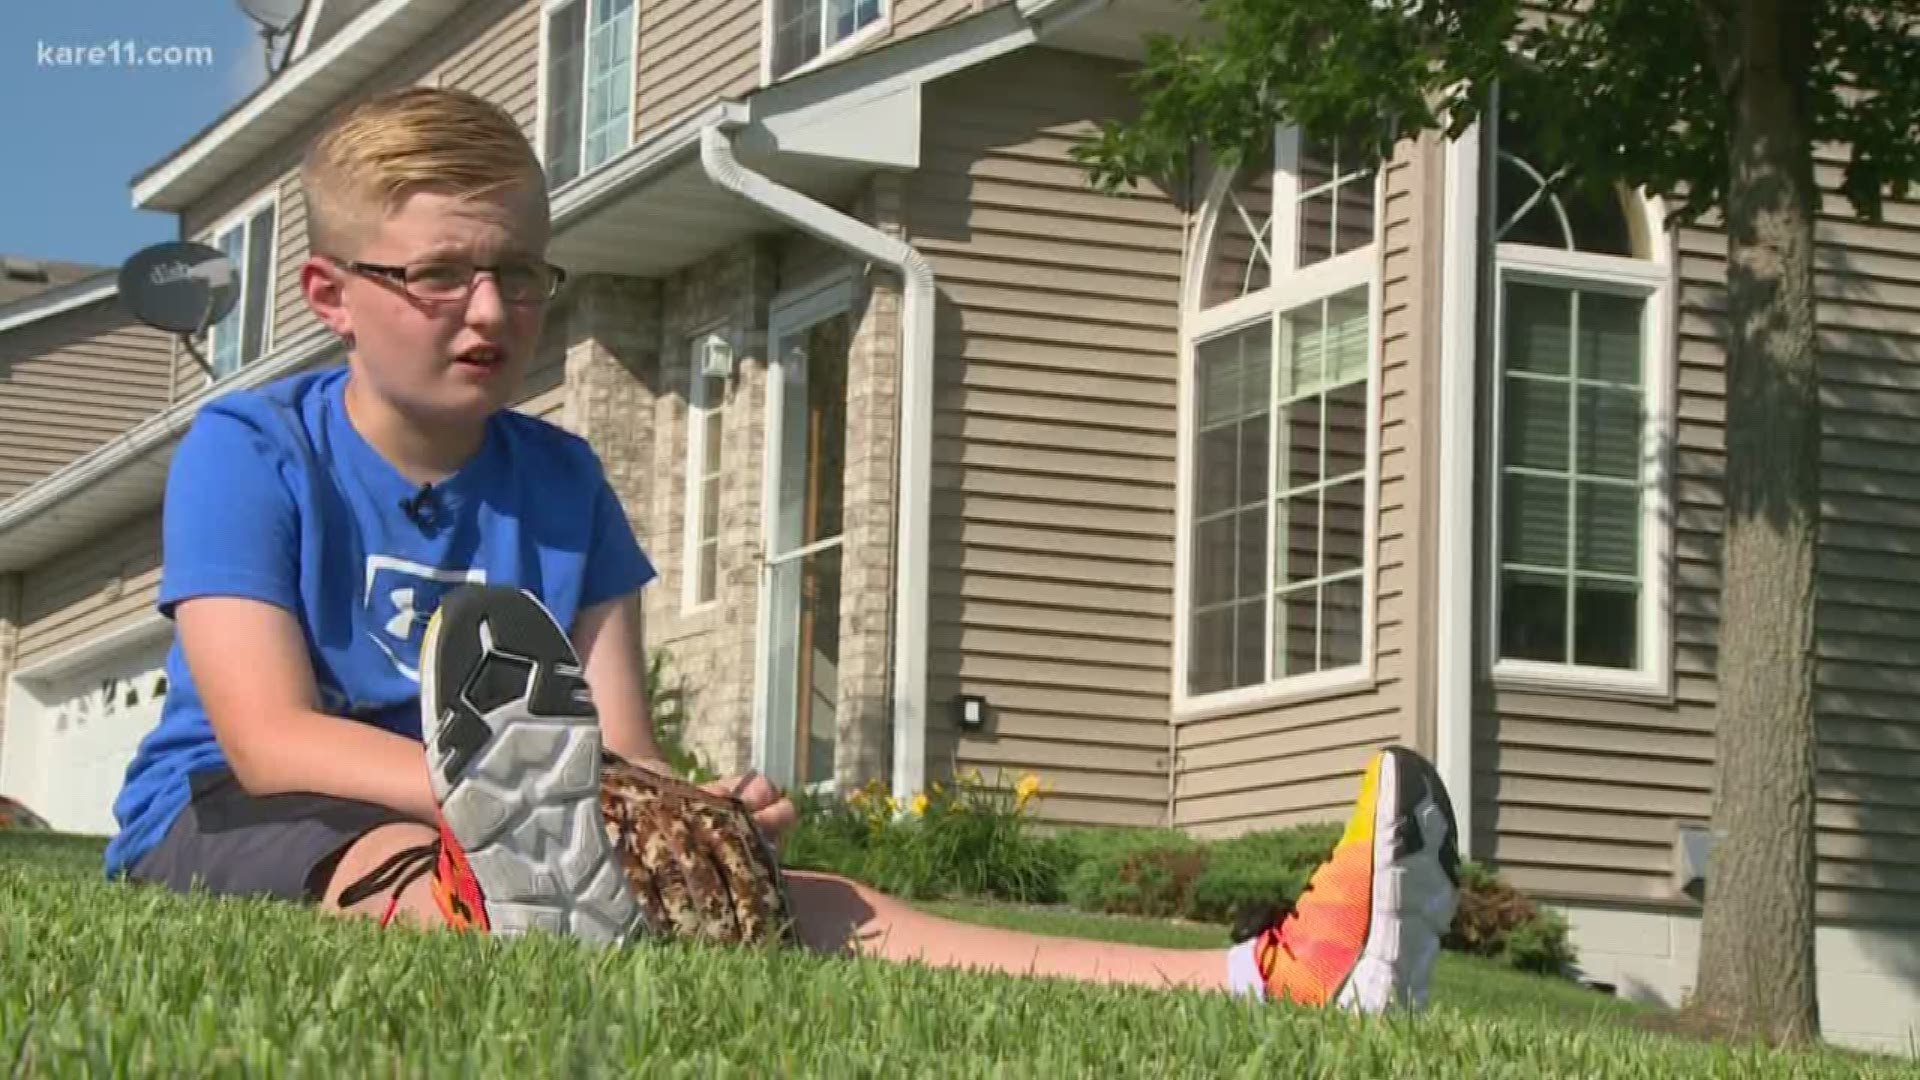 A small act of kindness in Minnesota is having a big impact all over social media. It started when the manager of a shoe store helped outfit a young boy with a unique condition.